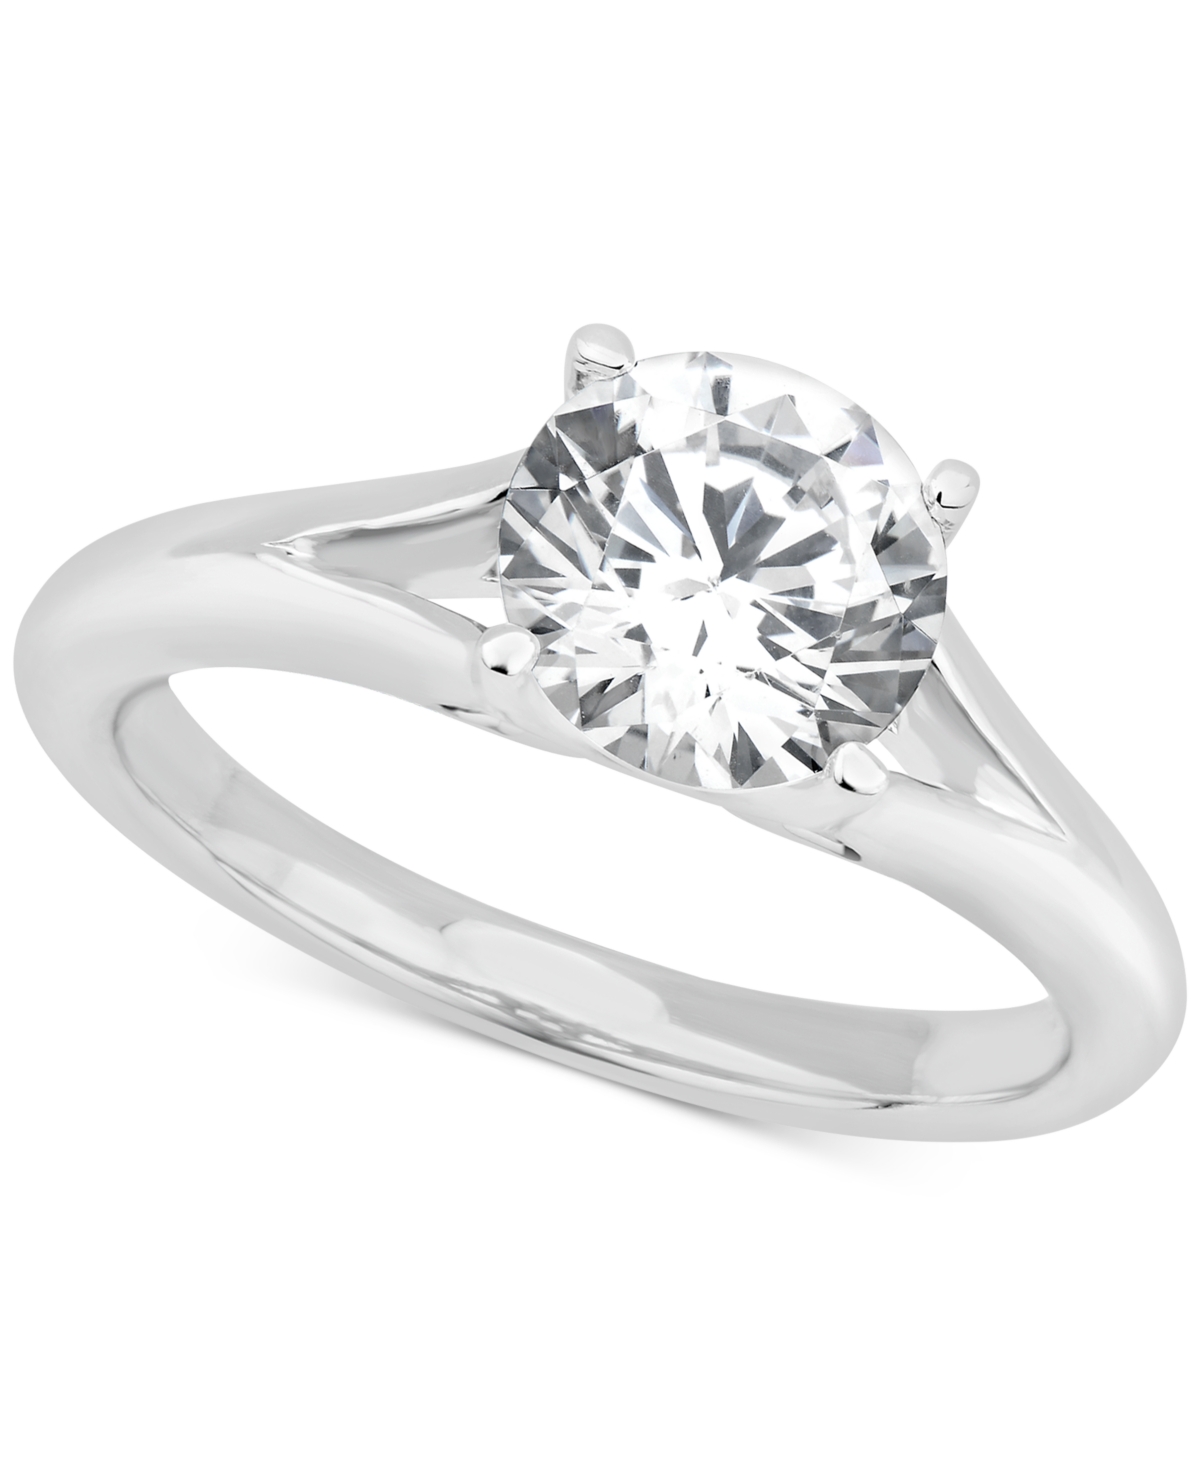 Gia Certified Diamond Solitaire Engagement Ring (1-1/2 ct. t.w.) in 14k White Gold - White Gold